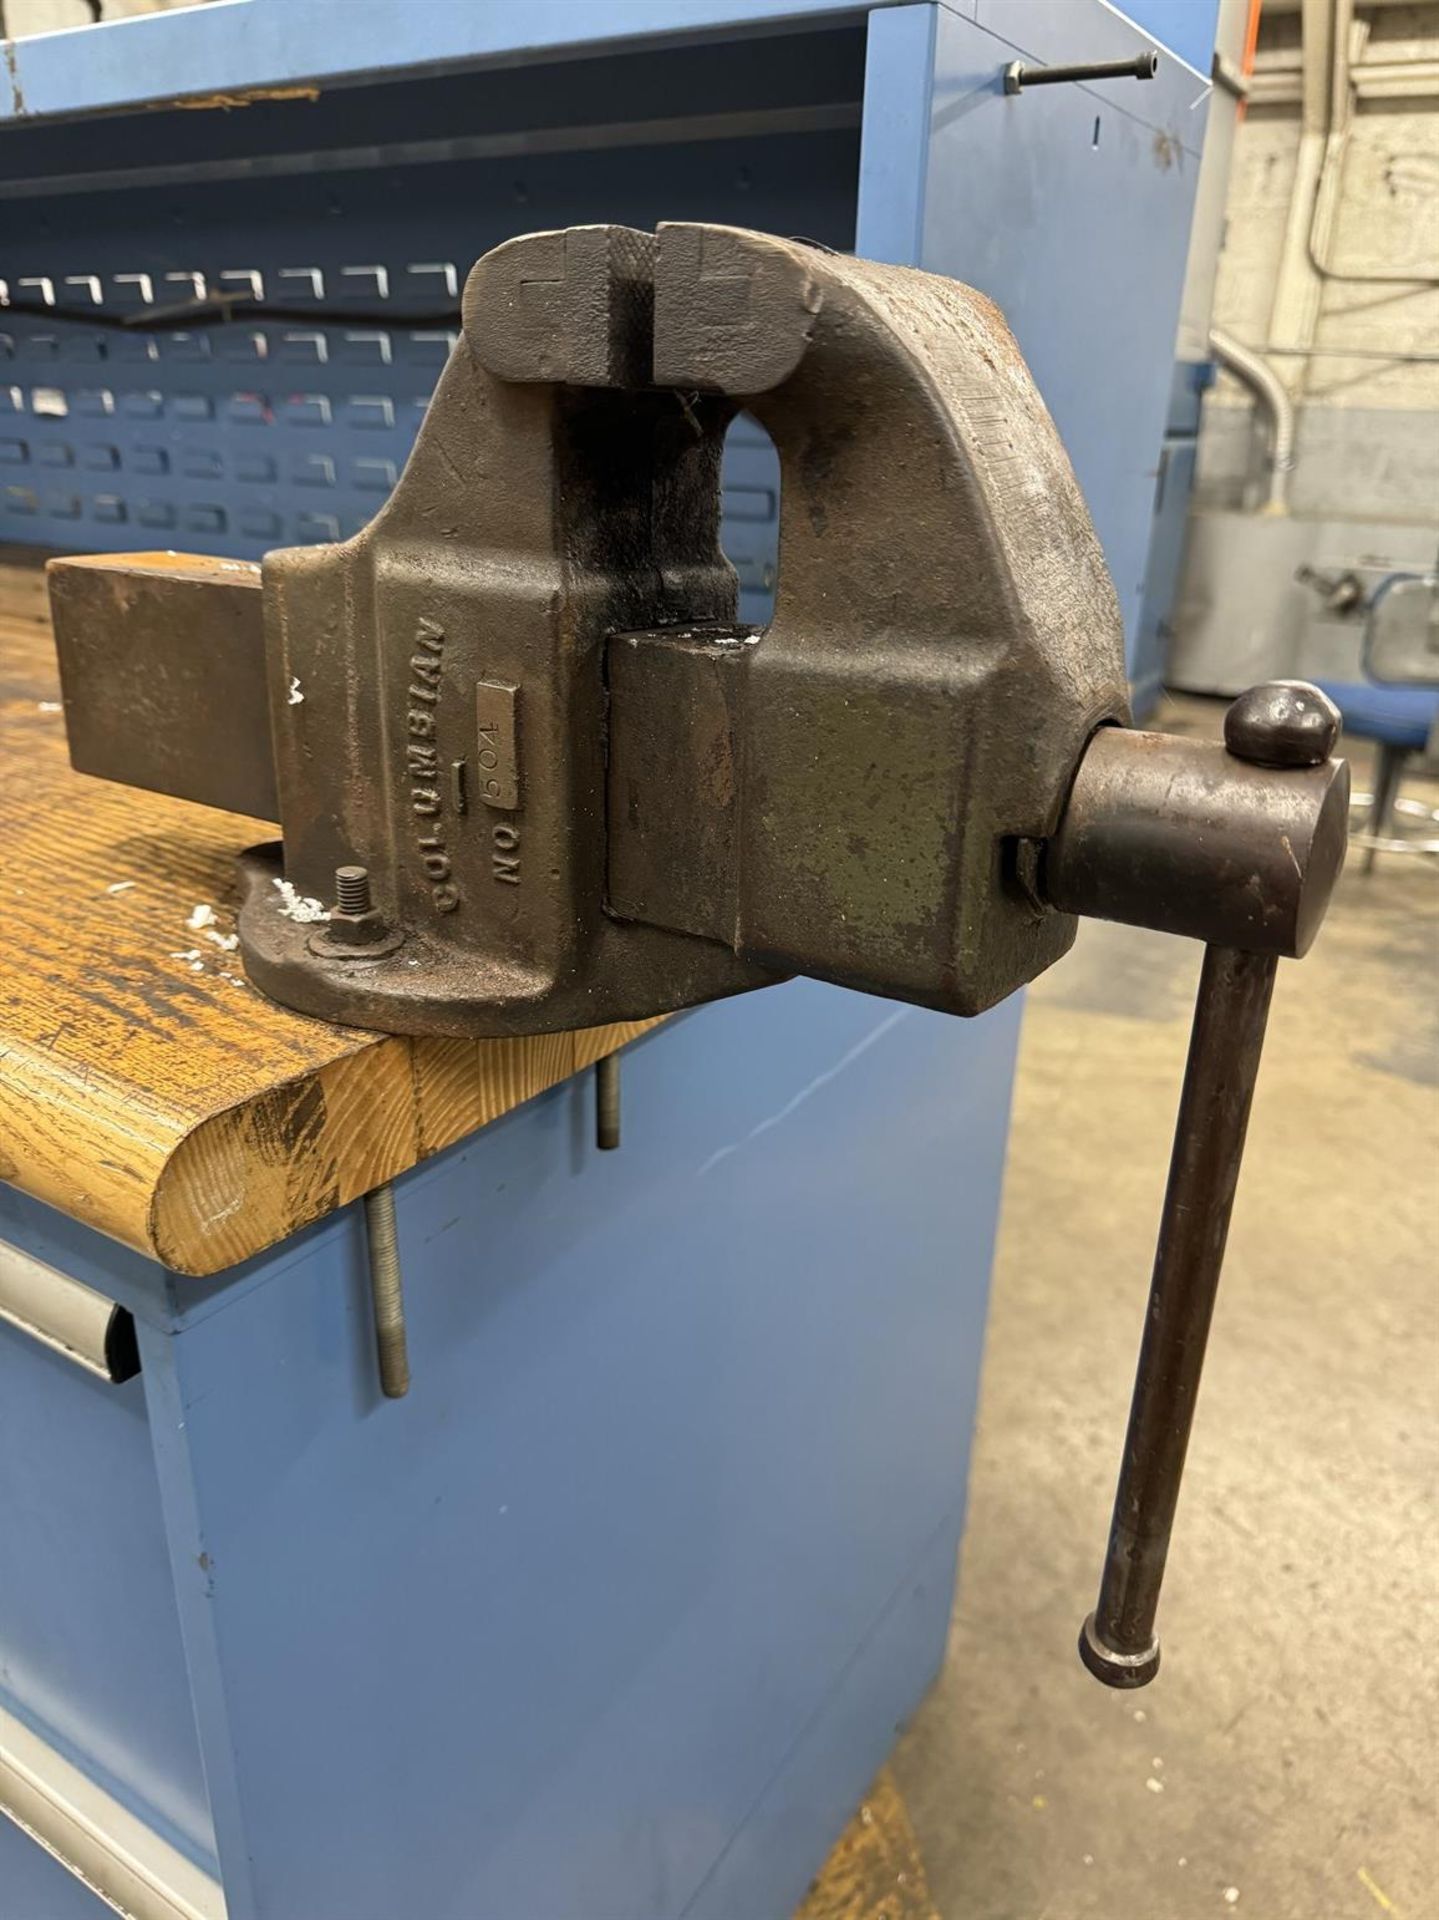 LISTA Wood Top Work Bench, 30" x 72", w/ COLUMBIAN 4" Bench Vise - Image 3 of 3